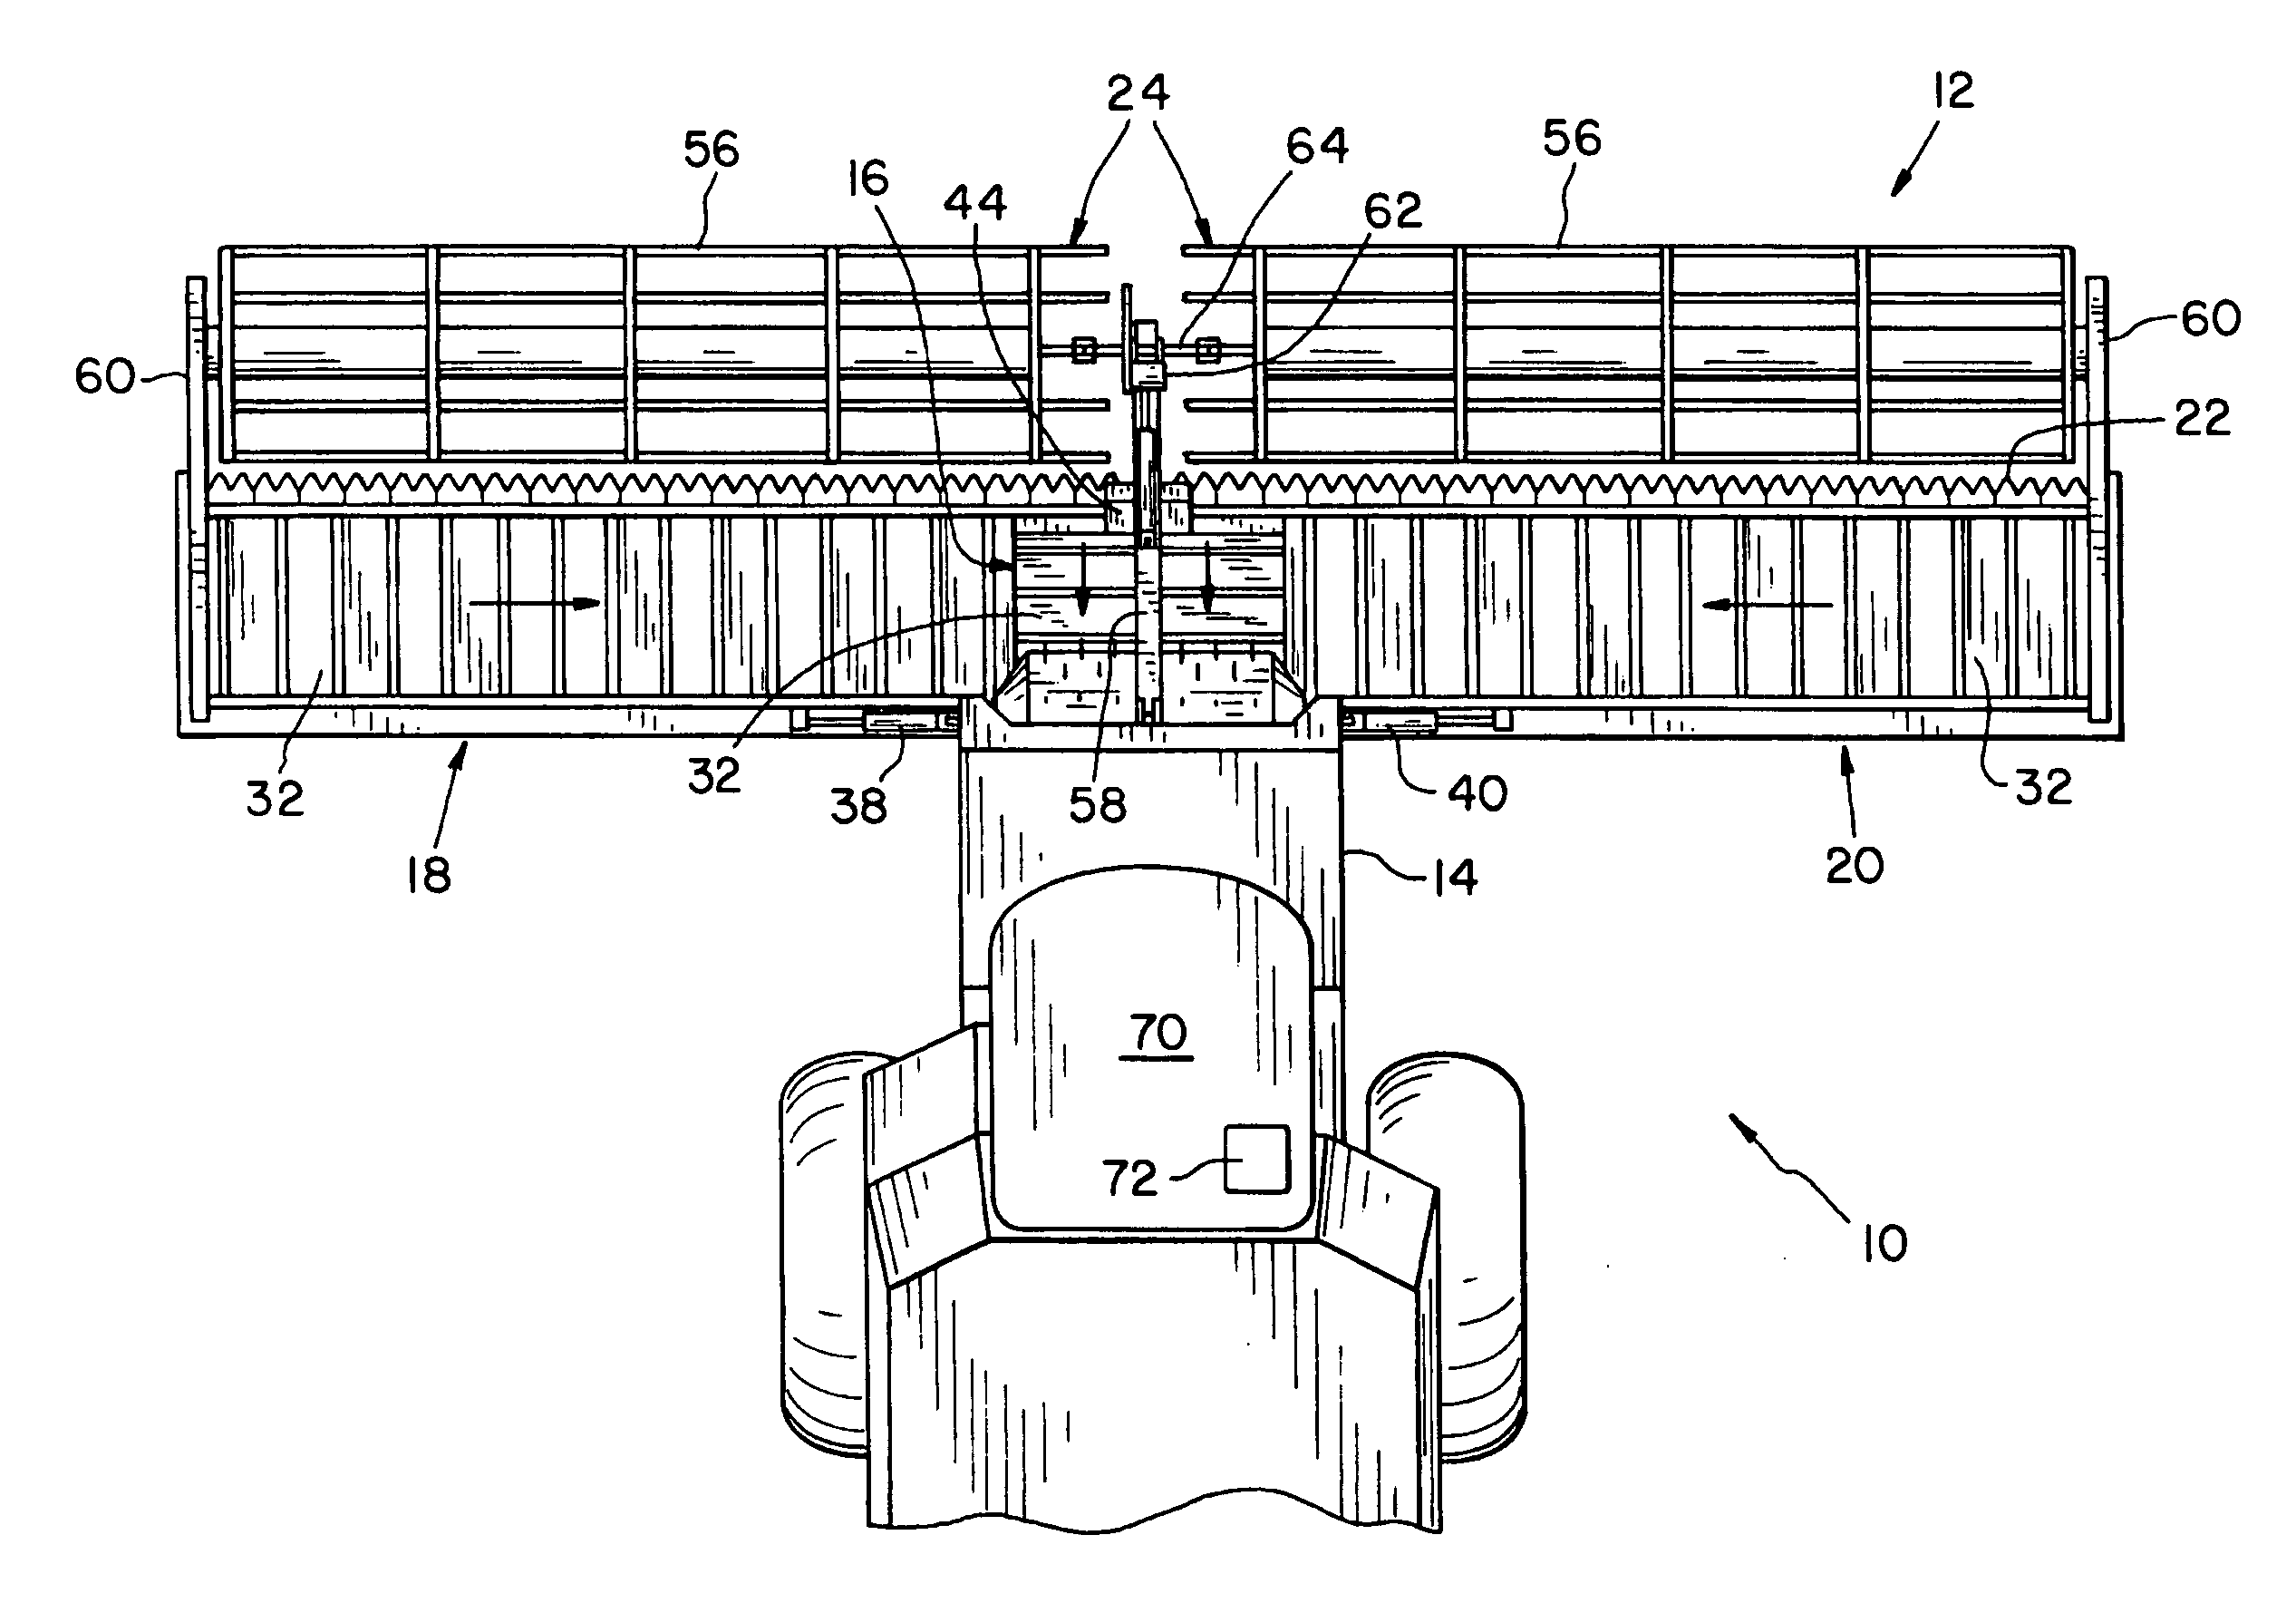 Flexible cutting platform to follow ground contour in an agricultural harvesting machine